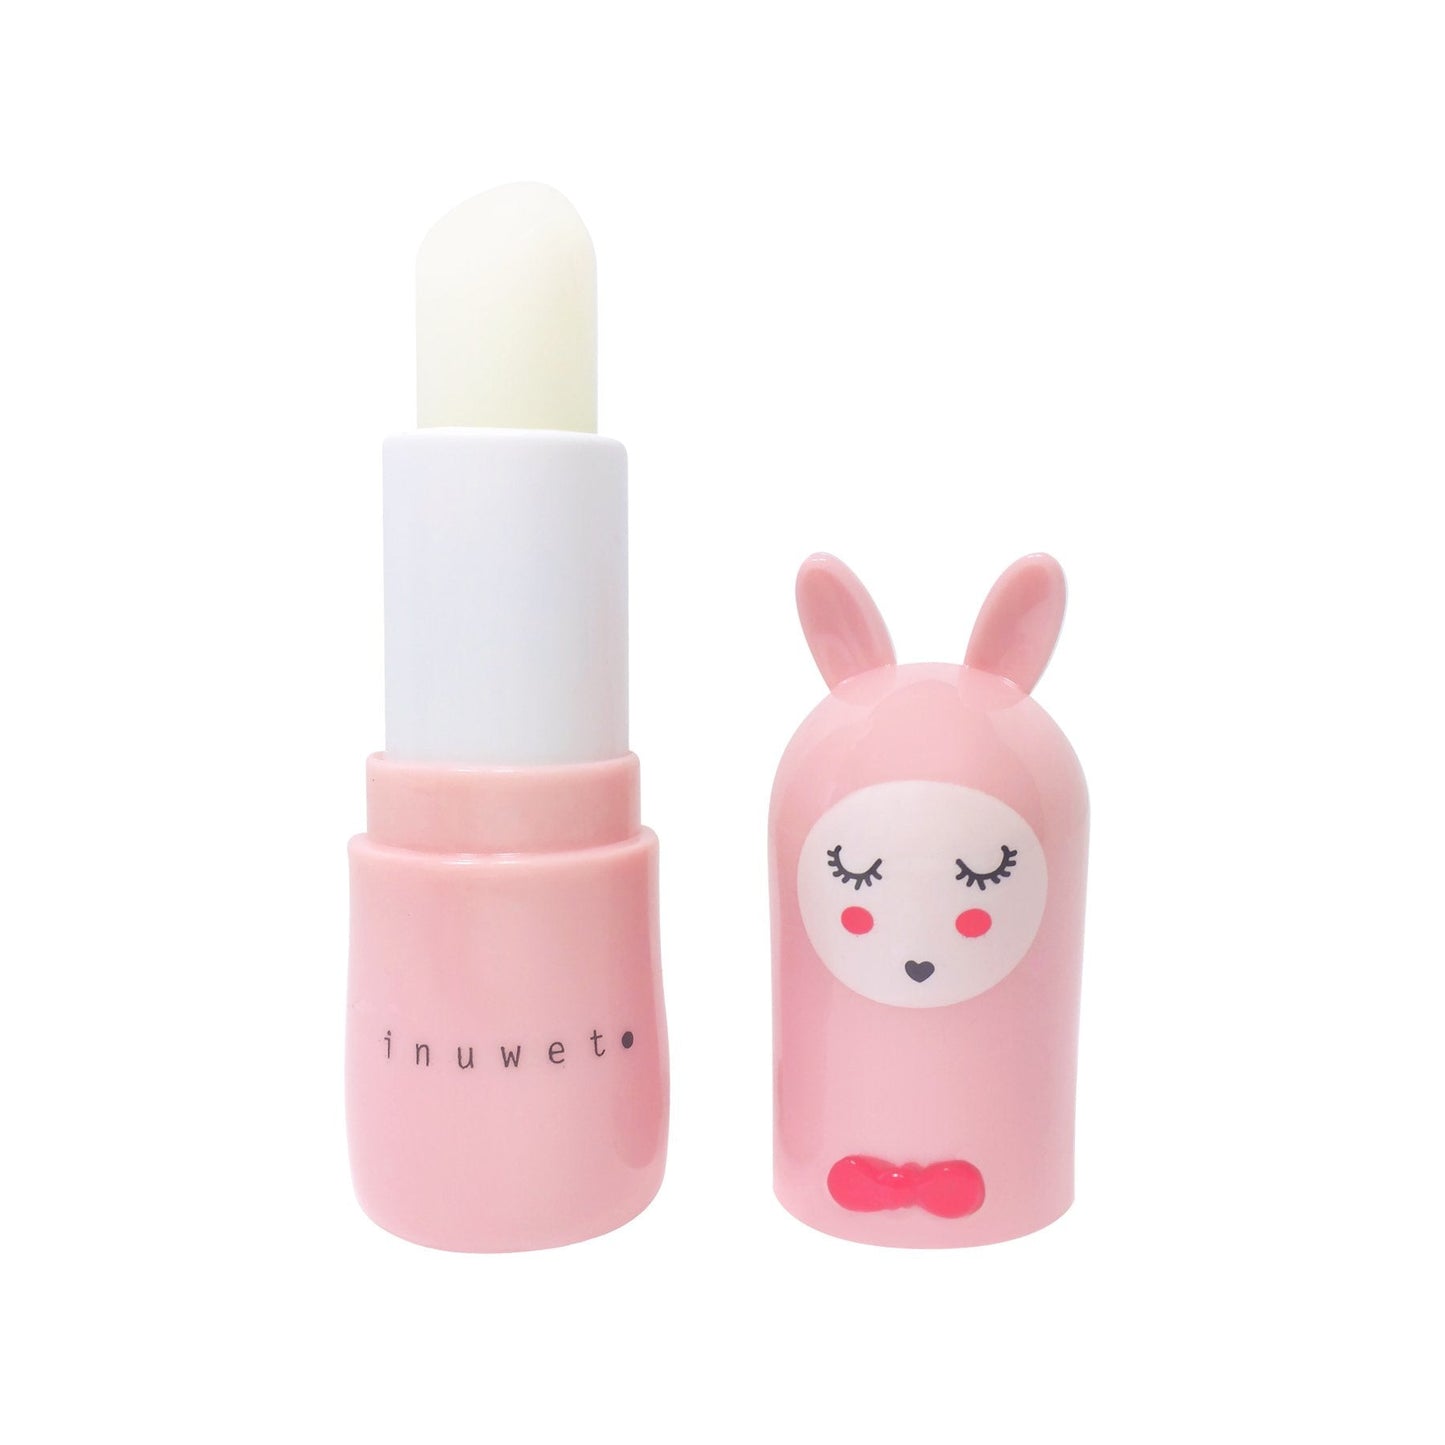 Bunny lip stick in pink